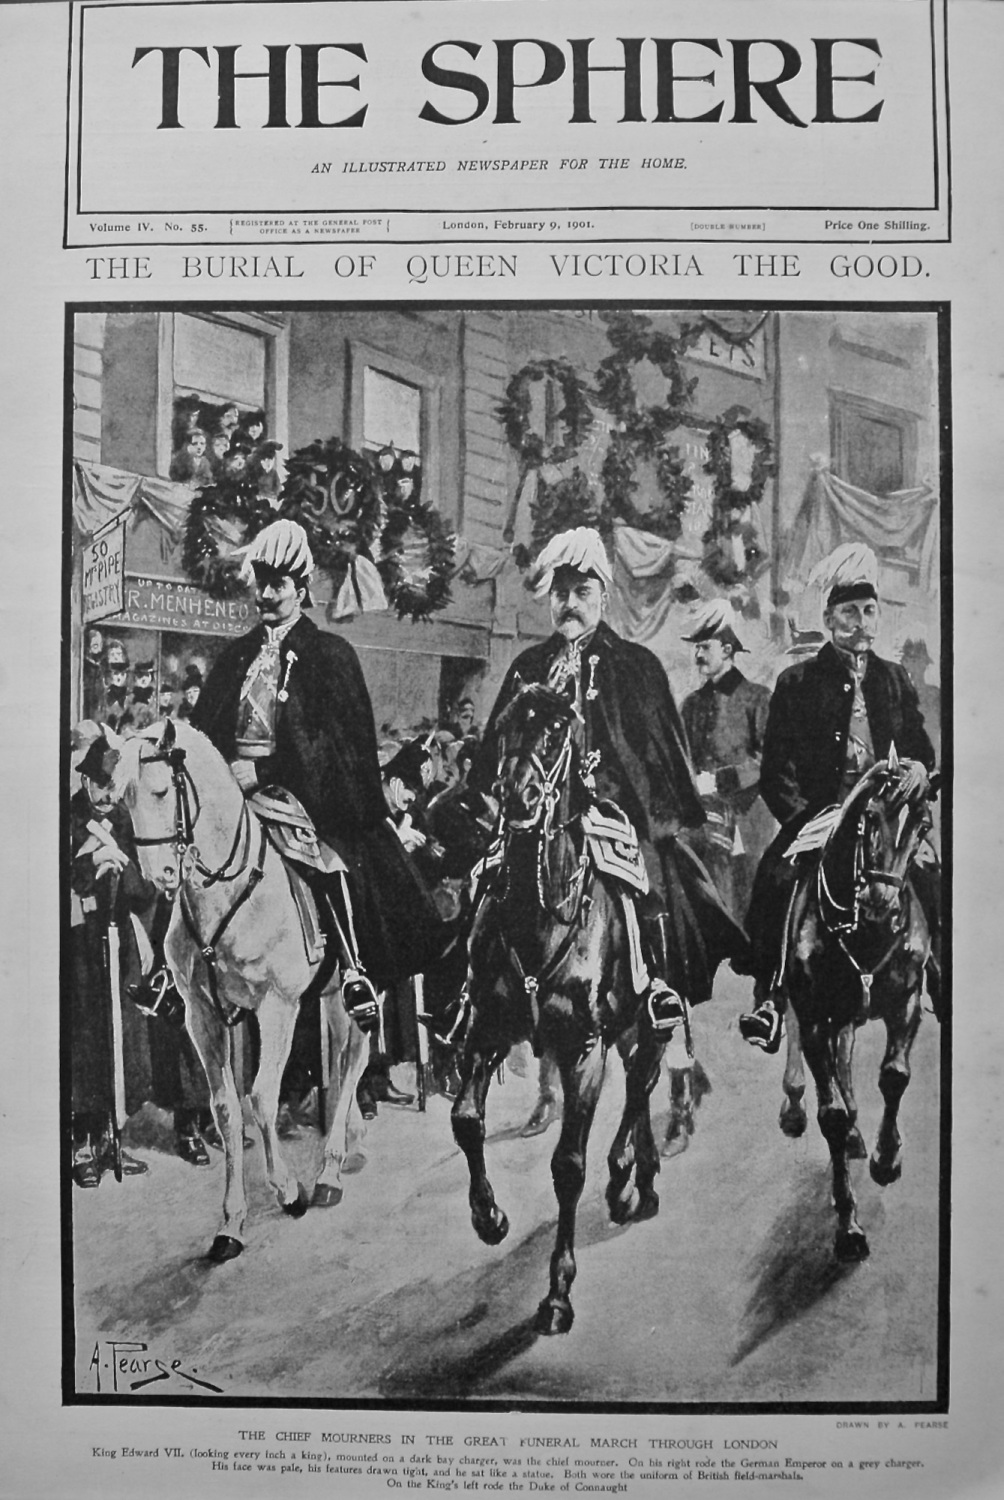 The Chief Mourners in the Great Funeral March Through London. 1901.